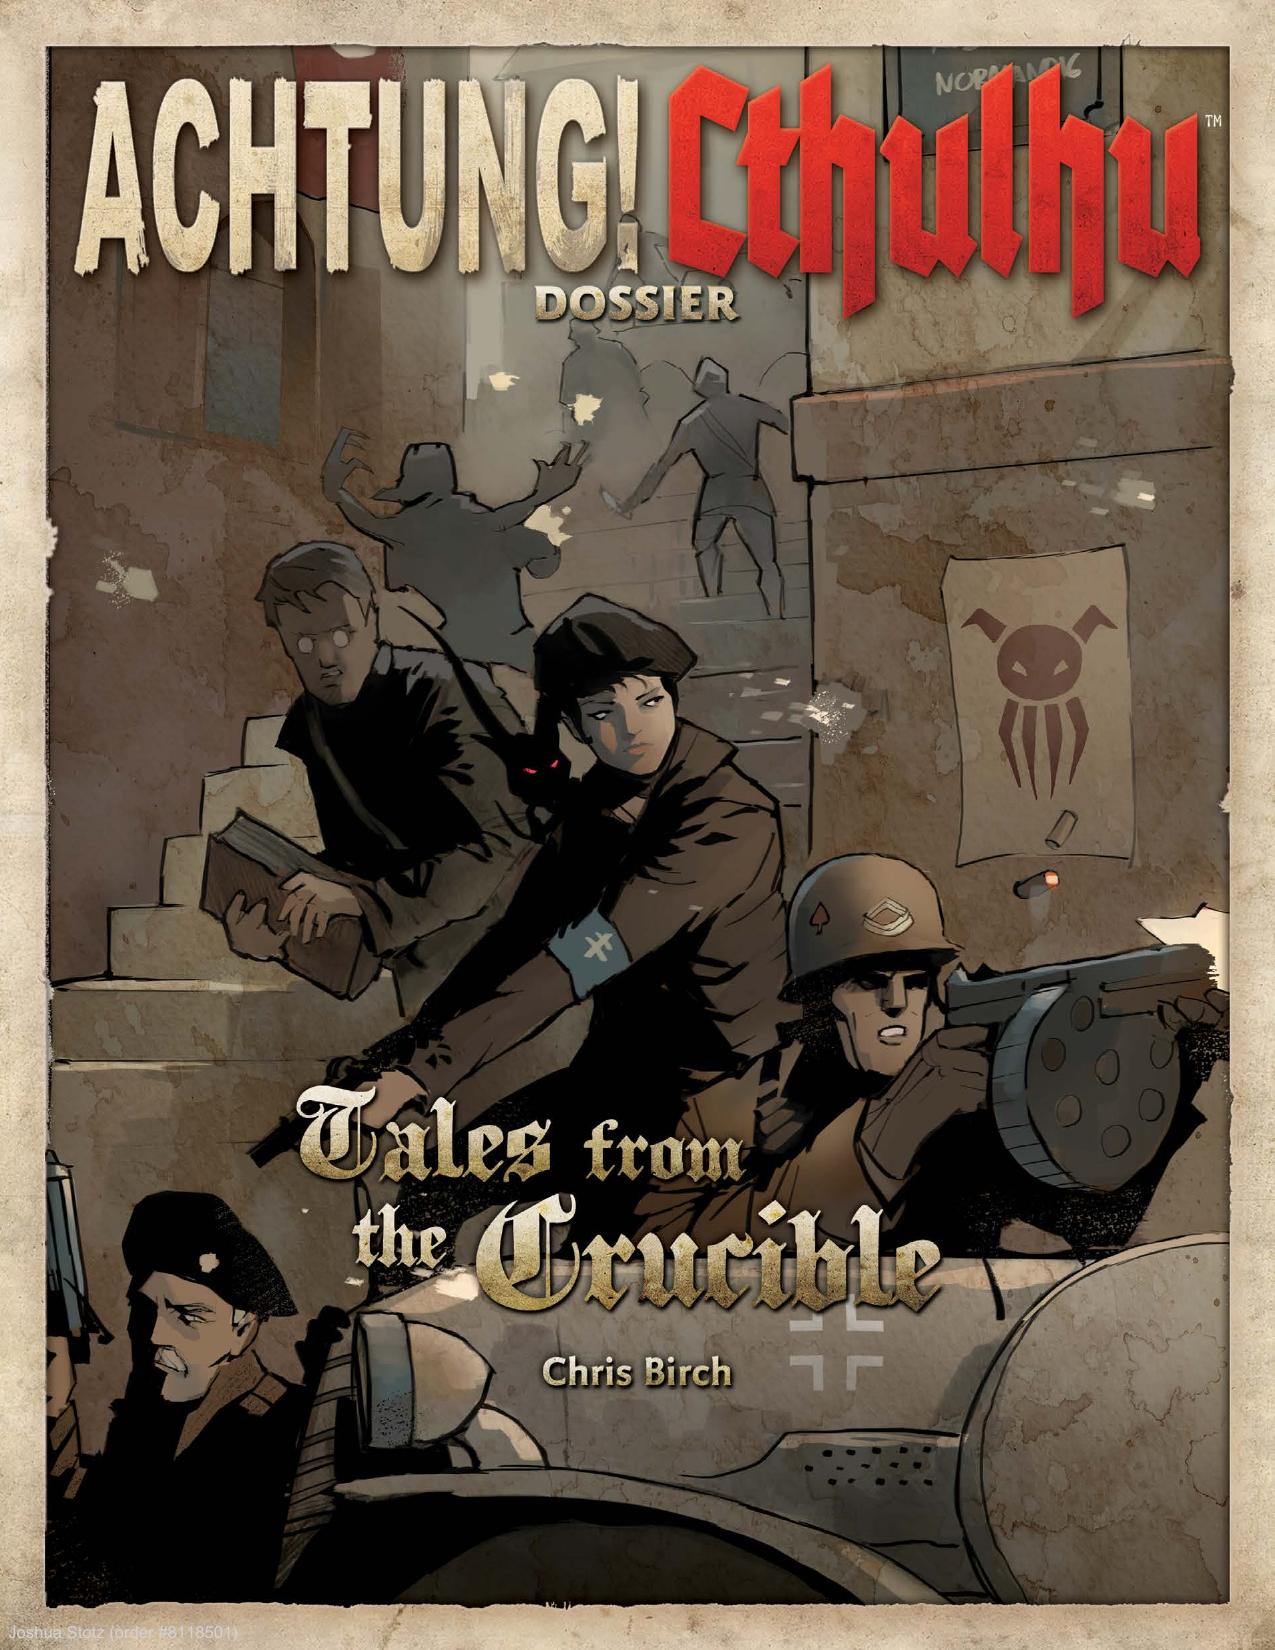 Achtung! Cthulhu: Dossier - Tales from the Crucible